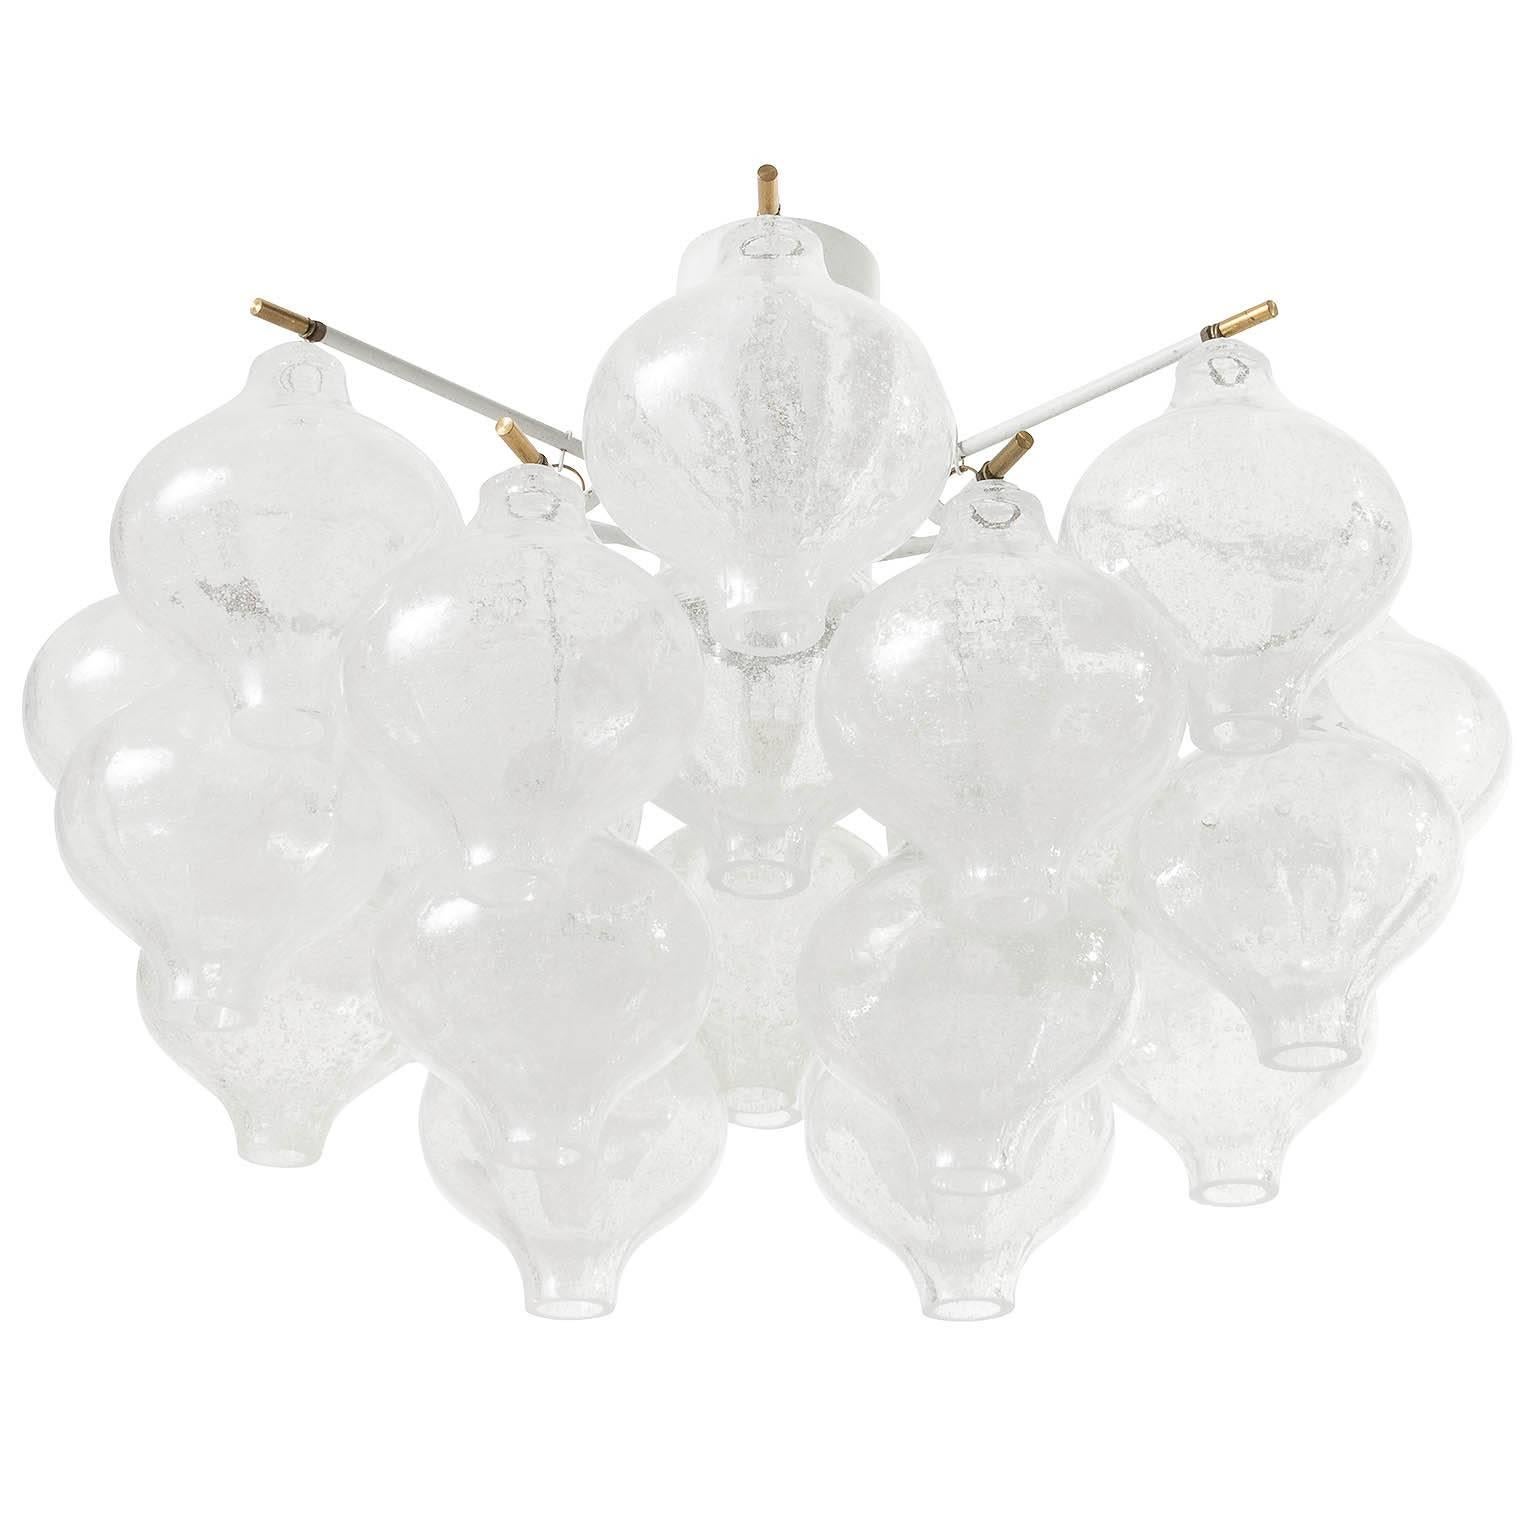 One of two beautiful 'Tulipan' flush mount lights or chandeliers by Kalmar Austria, manufactured in Mid-Century, circa 1970 (late 1960s or early 1970s). 
The name Tulipan derives from the tulip shaped hand blown bubble glasses. Each glass is